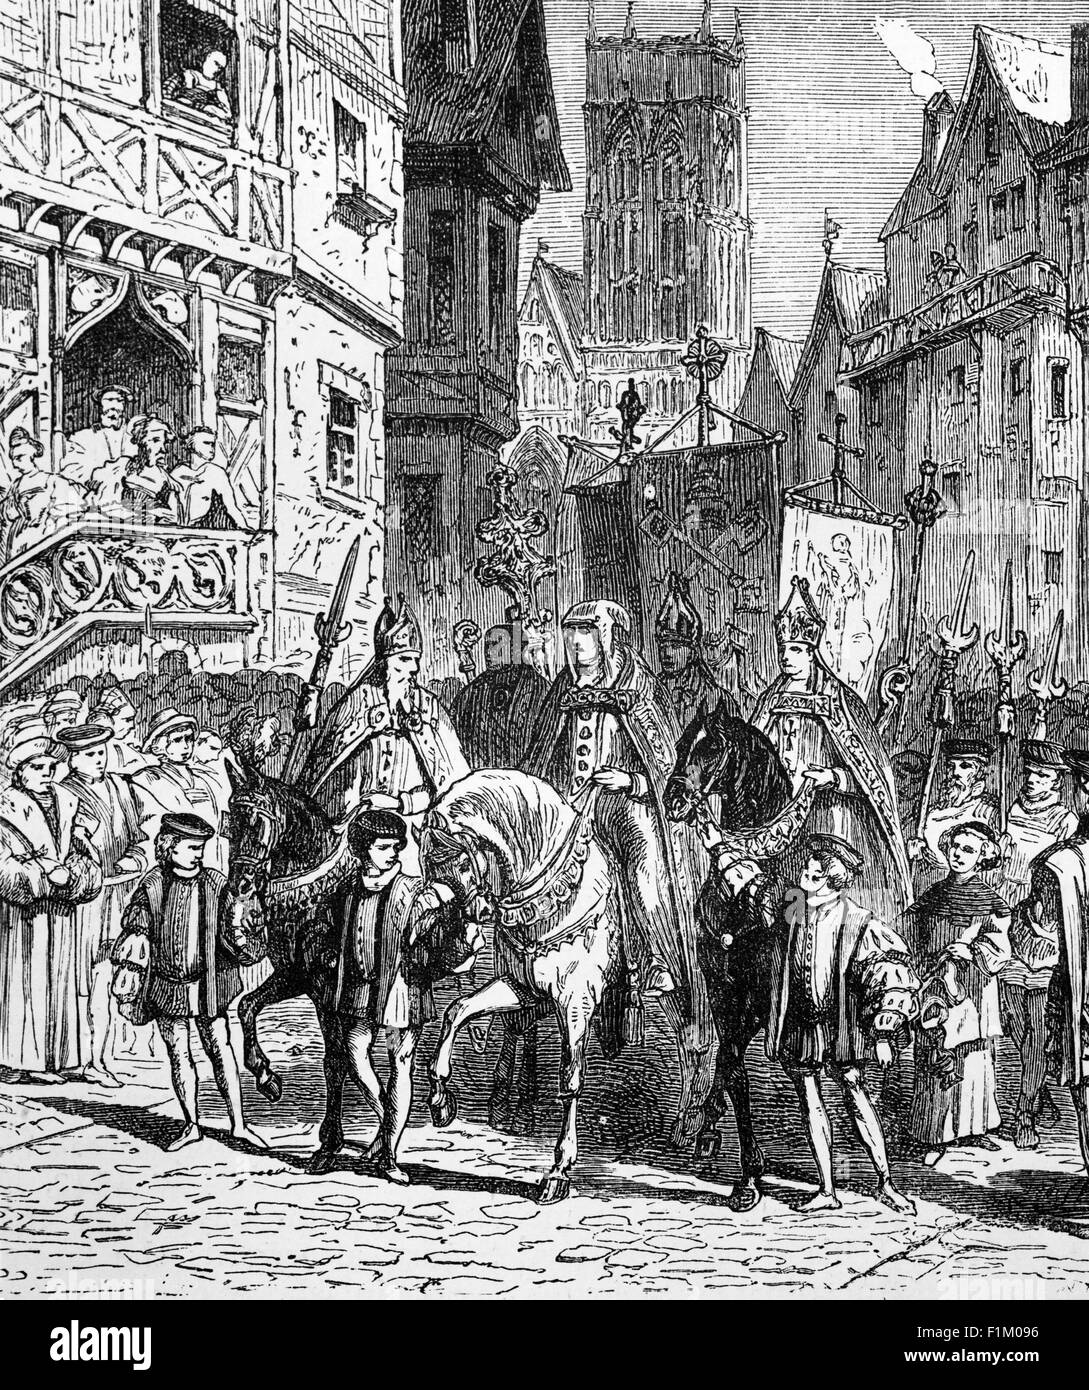 The Triumphant Entry of the Catholic Bishops under the auspices of Queen Mary 1st, into London in the mid 16th Century. Mary rode triumphantly into London on 3 August 1553, on a wave of popular support. She was accompanied by her half-sister Elizabeth and a procession of over 800 nobles and gentlemen. Stock Photo